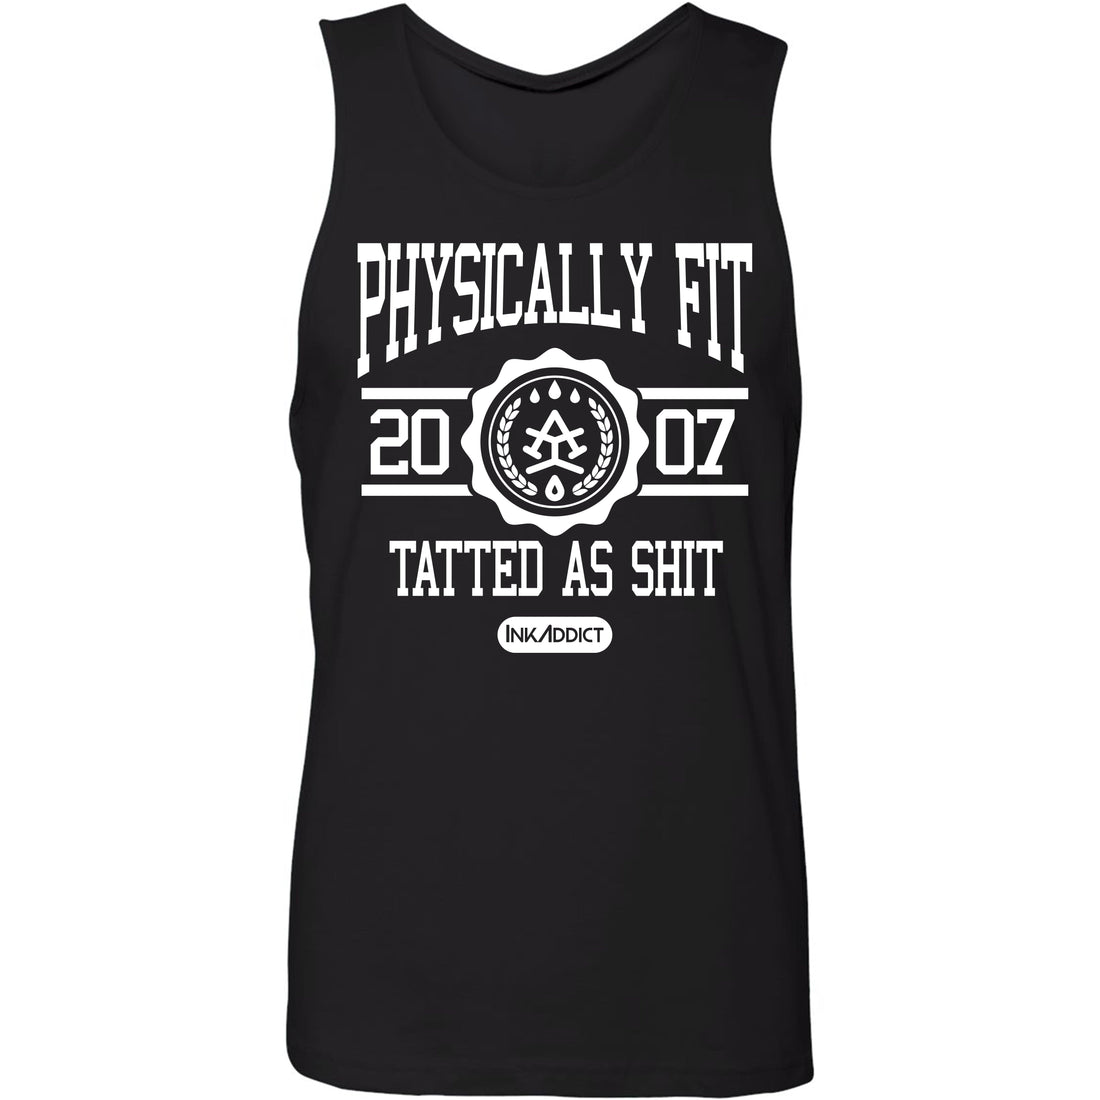 Physically Fit Collegiate Men's Tank